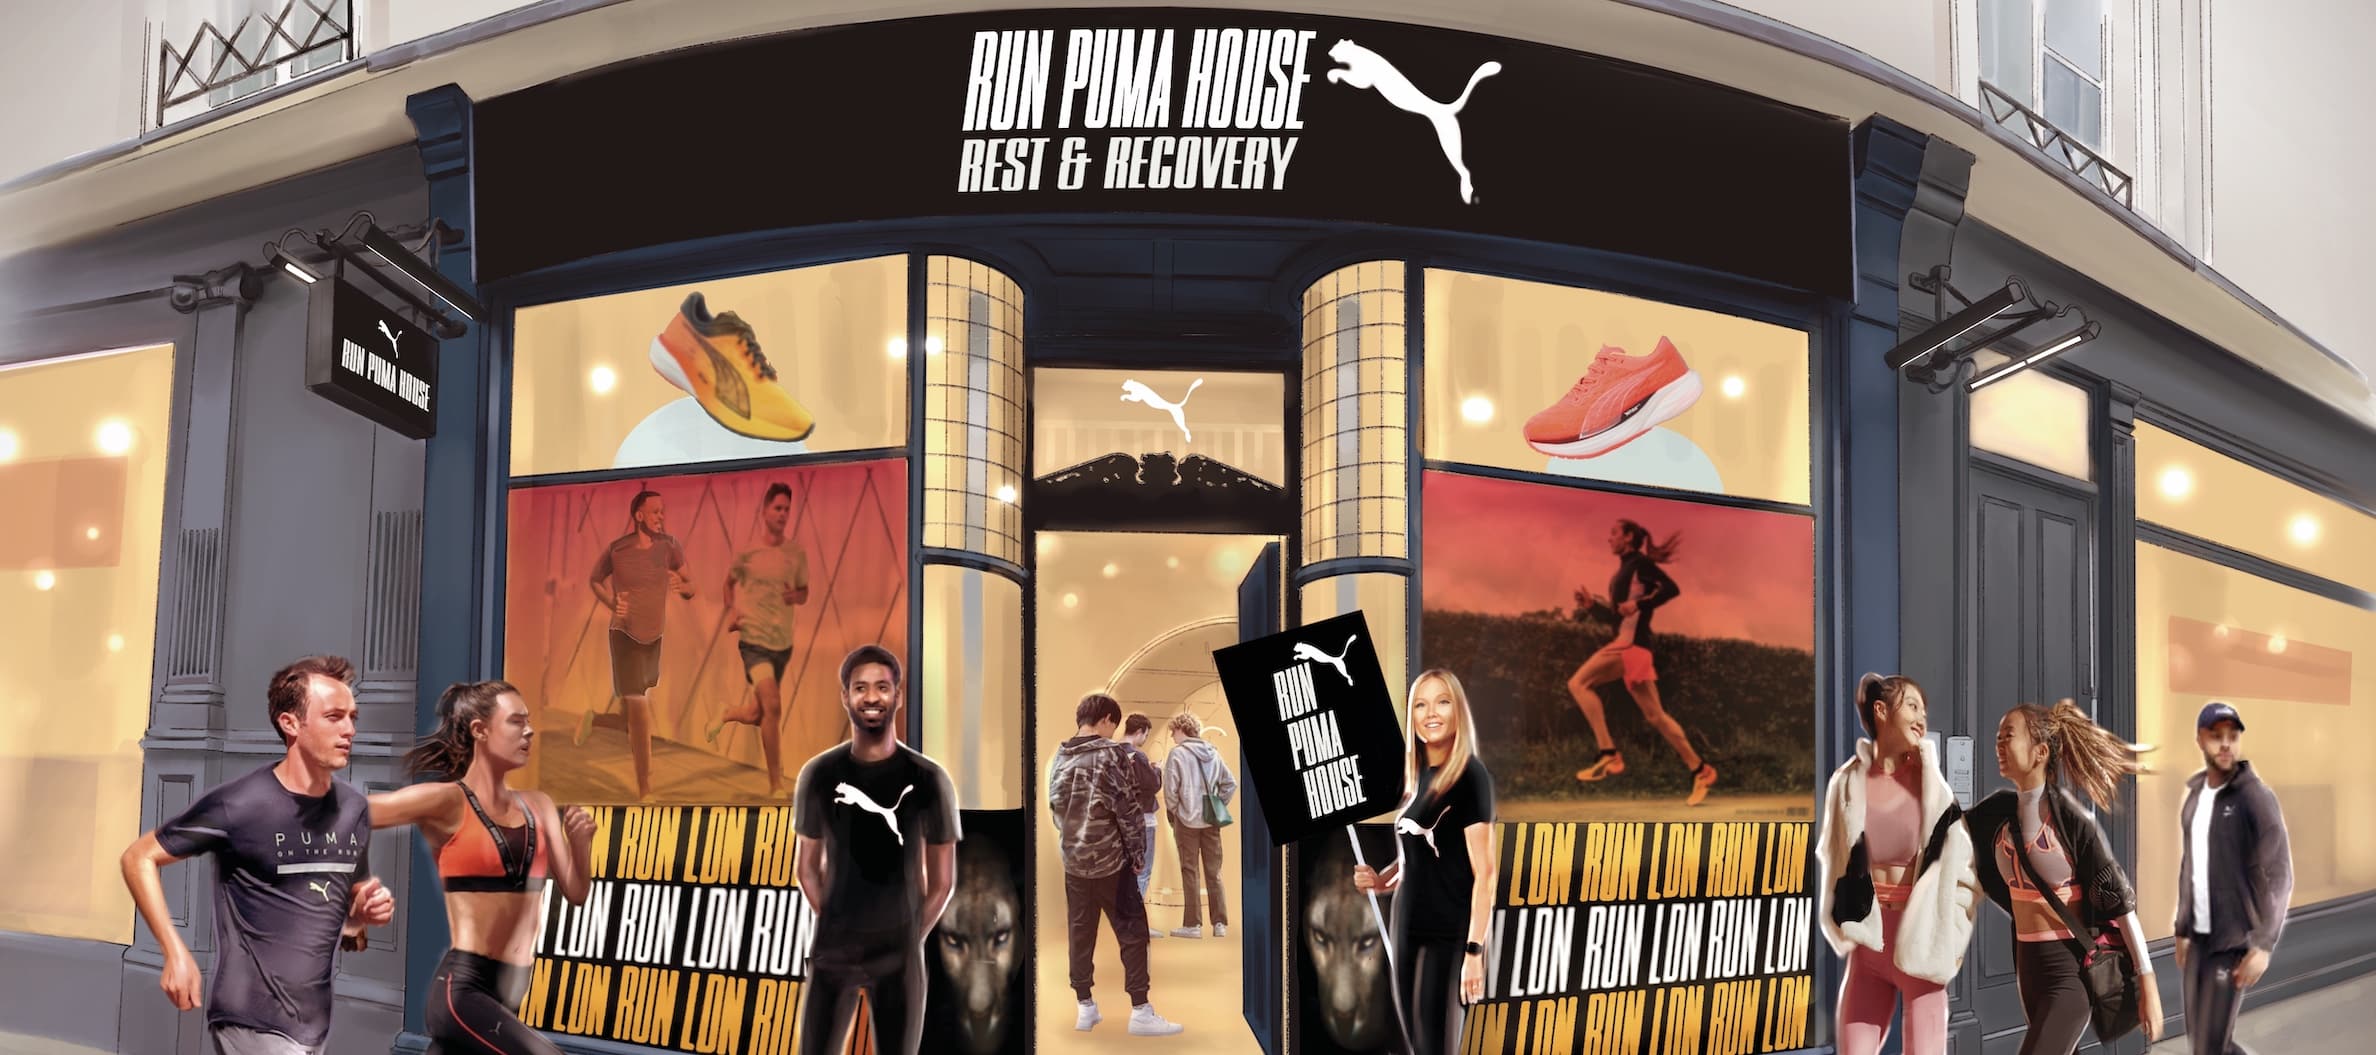 Run puma house of rest and recovery – london marathon